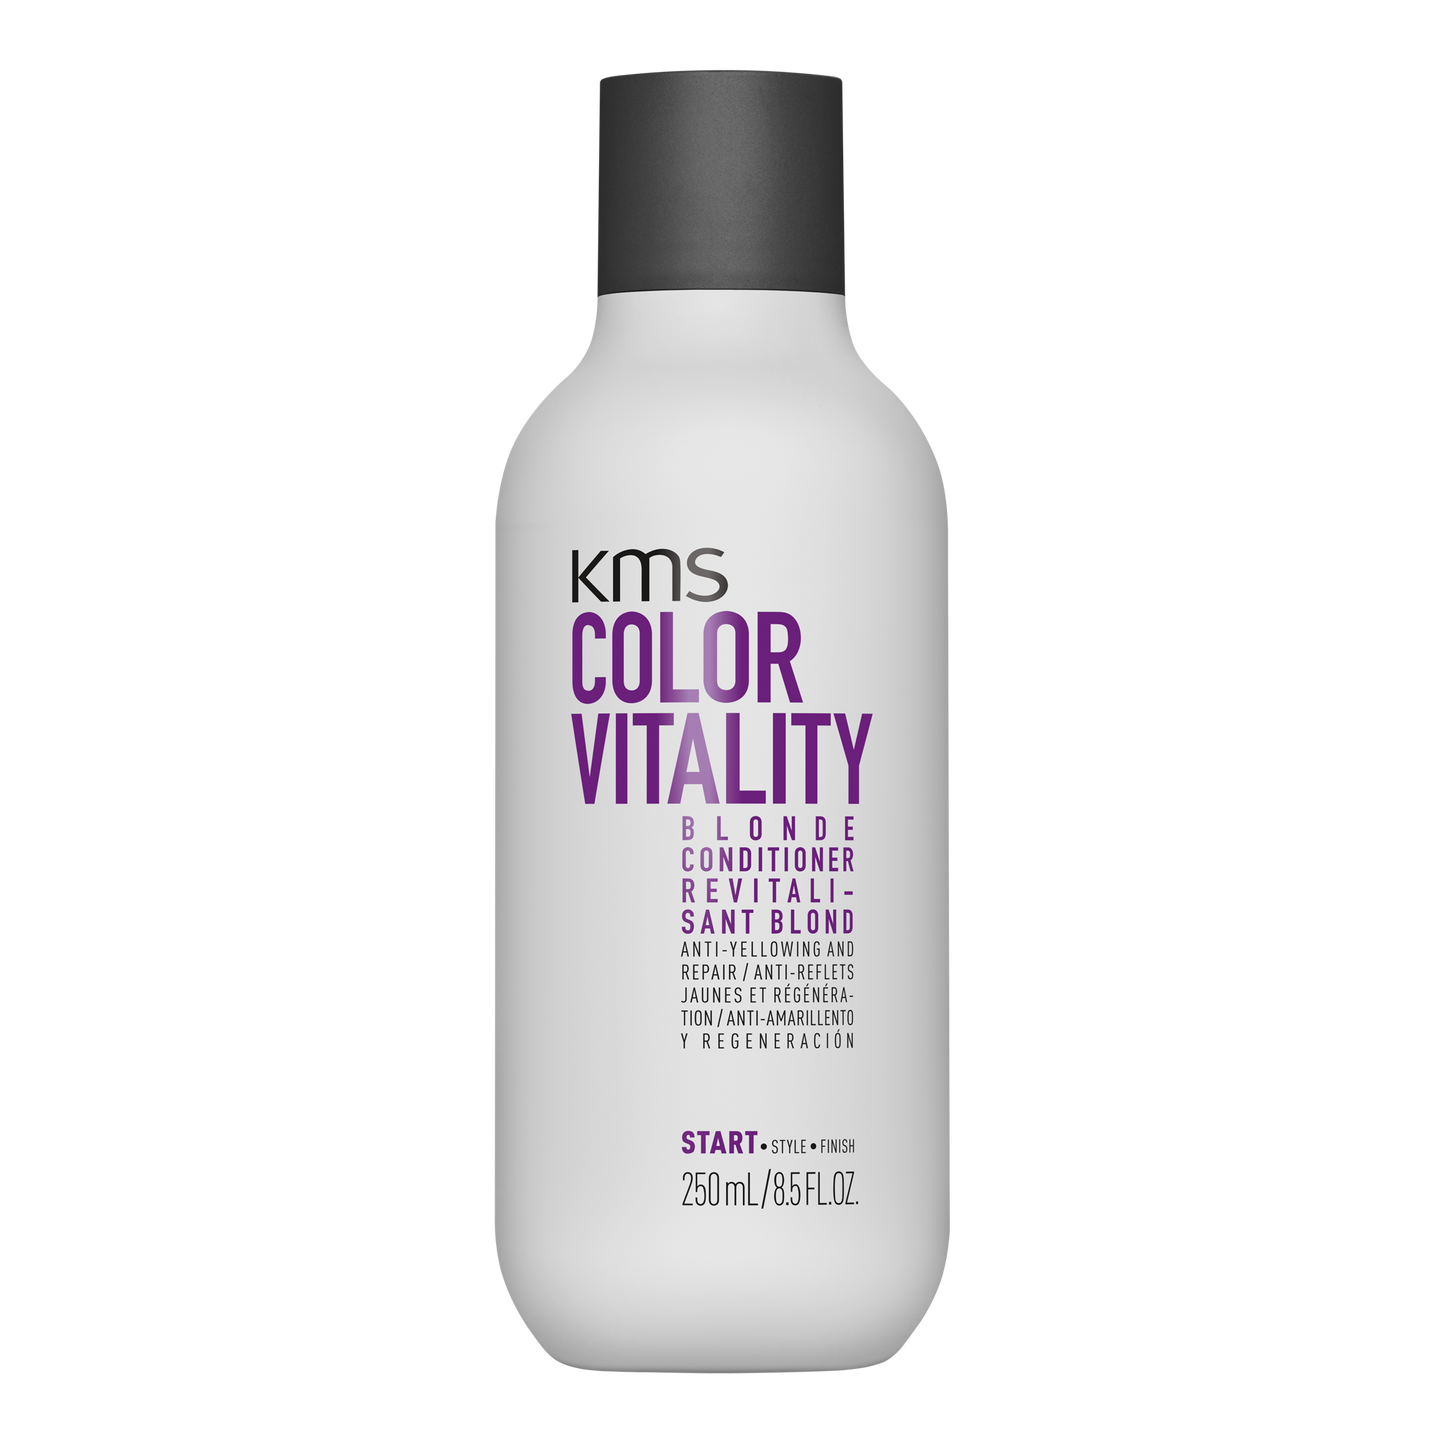 KMS COLORVITALITY Blonde Conditioner 250mL